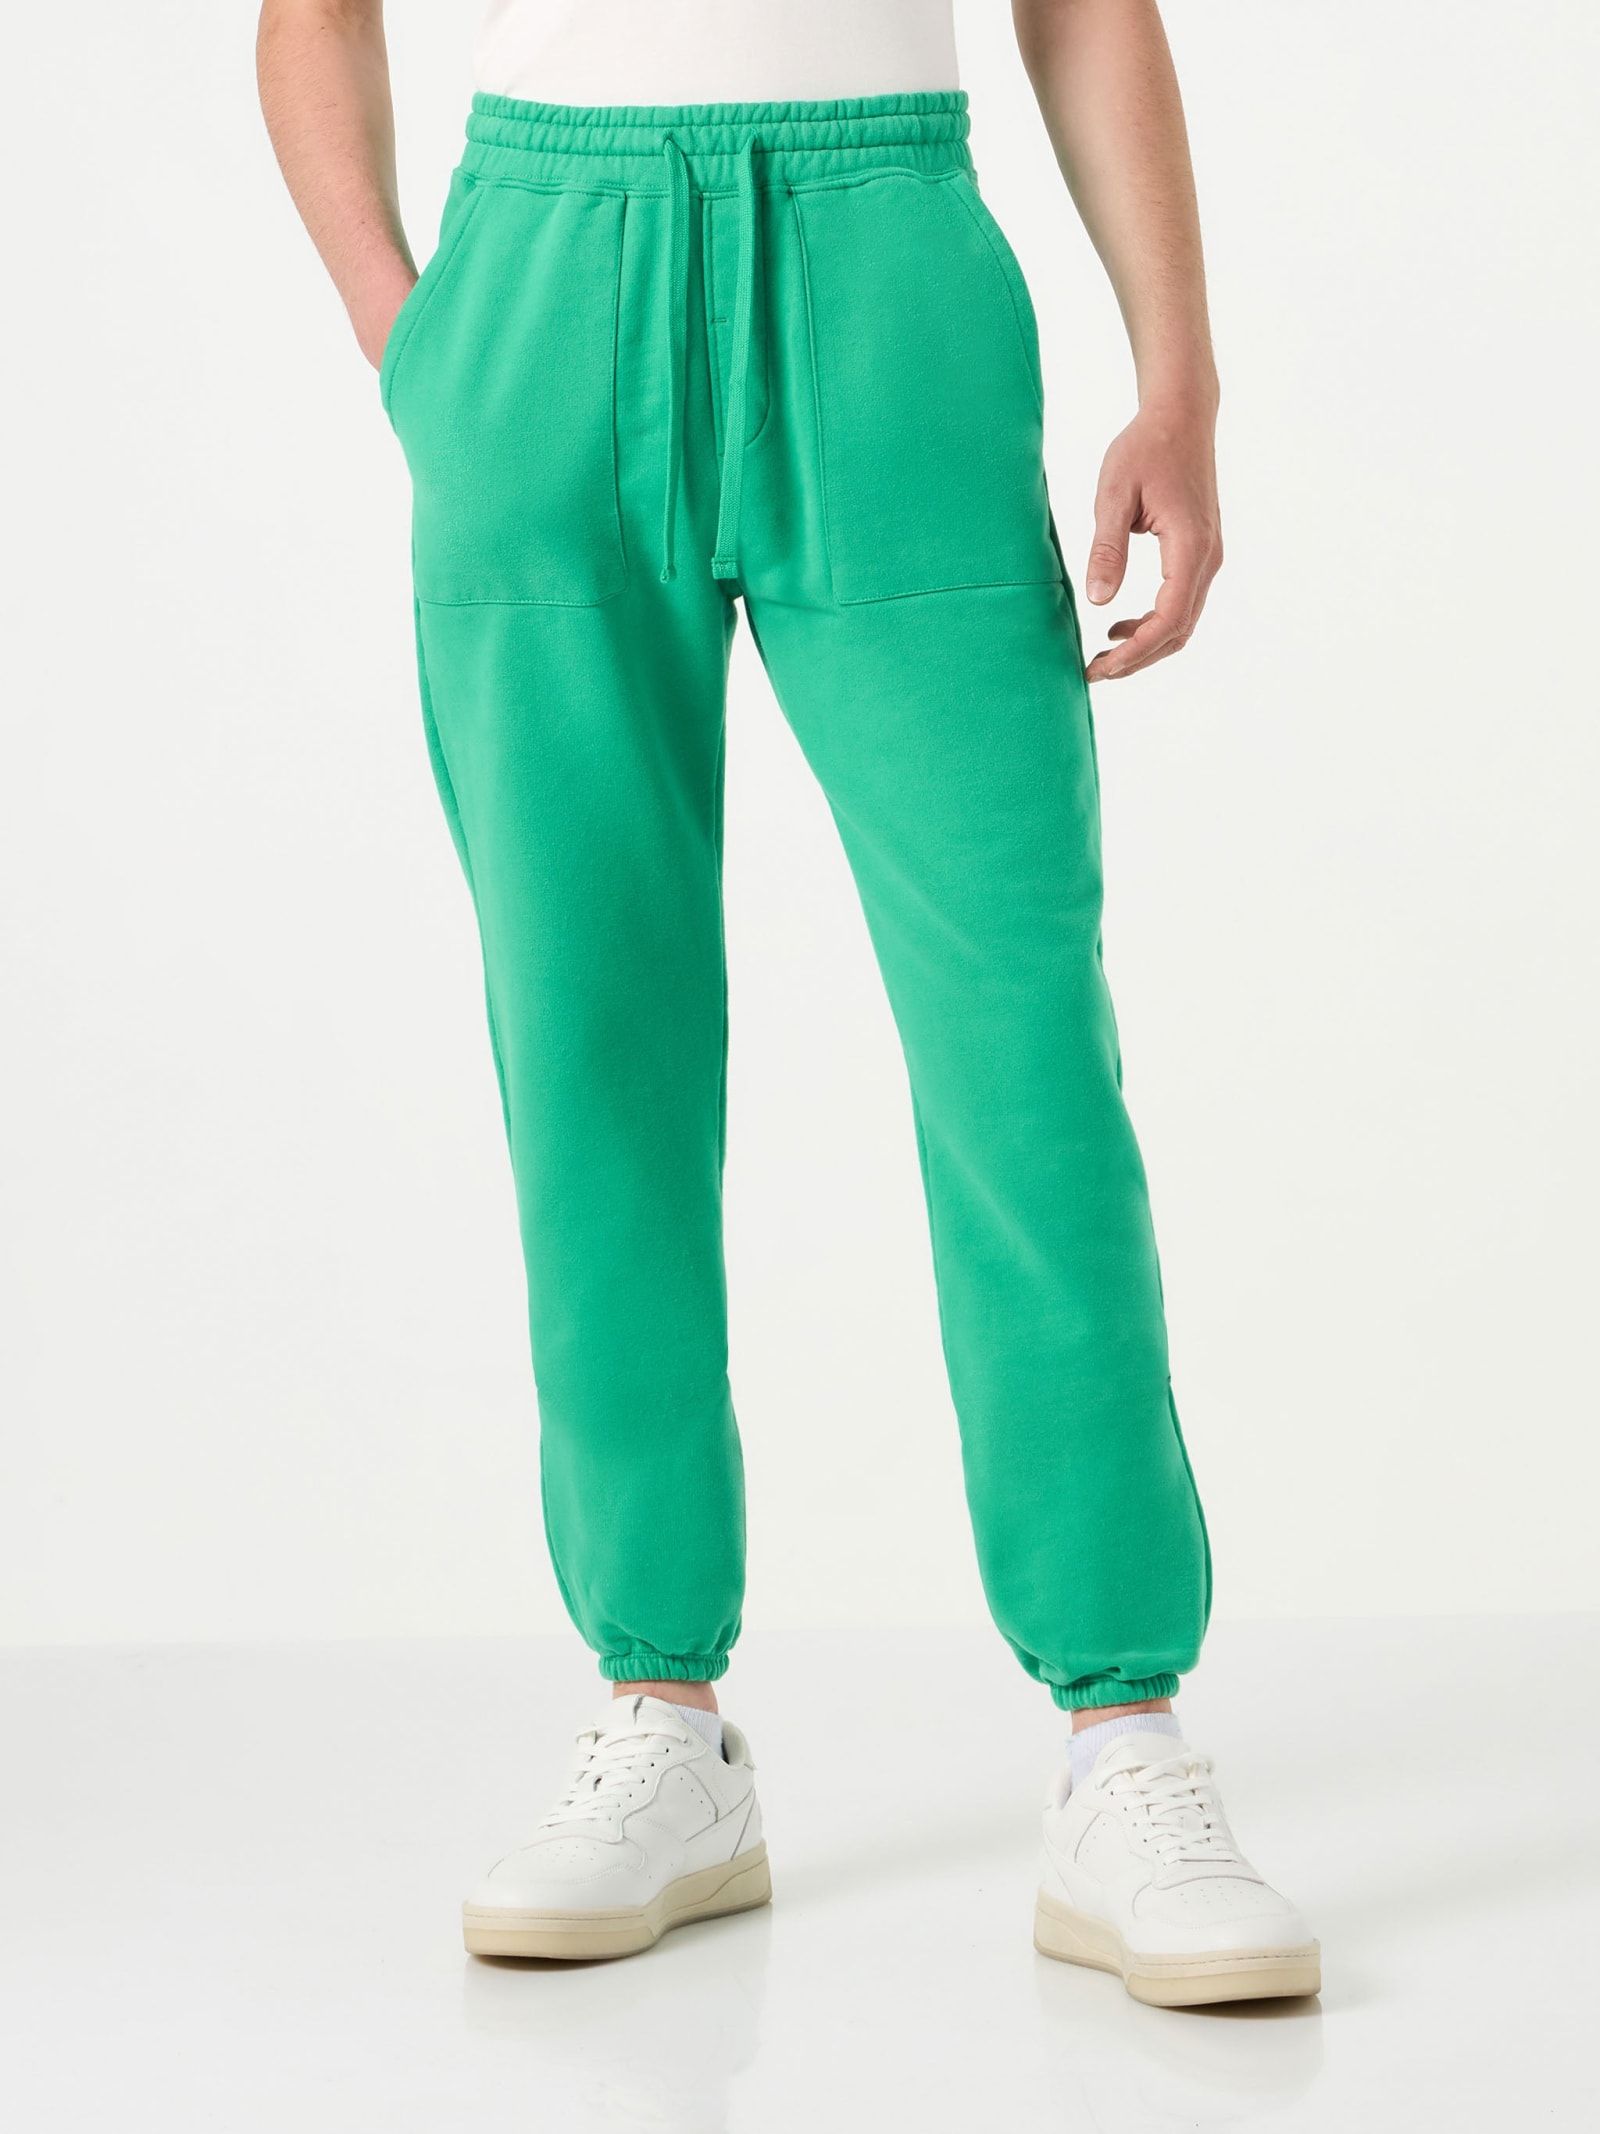 Grass Green Track Pants Pantone Special Edition